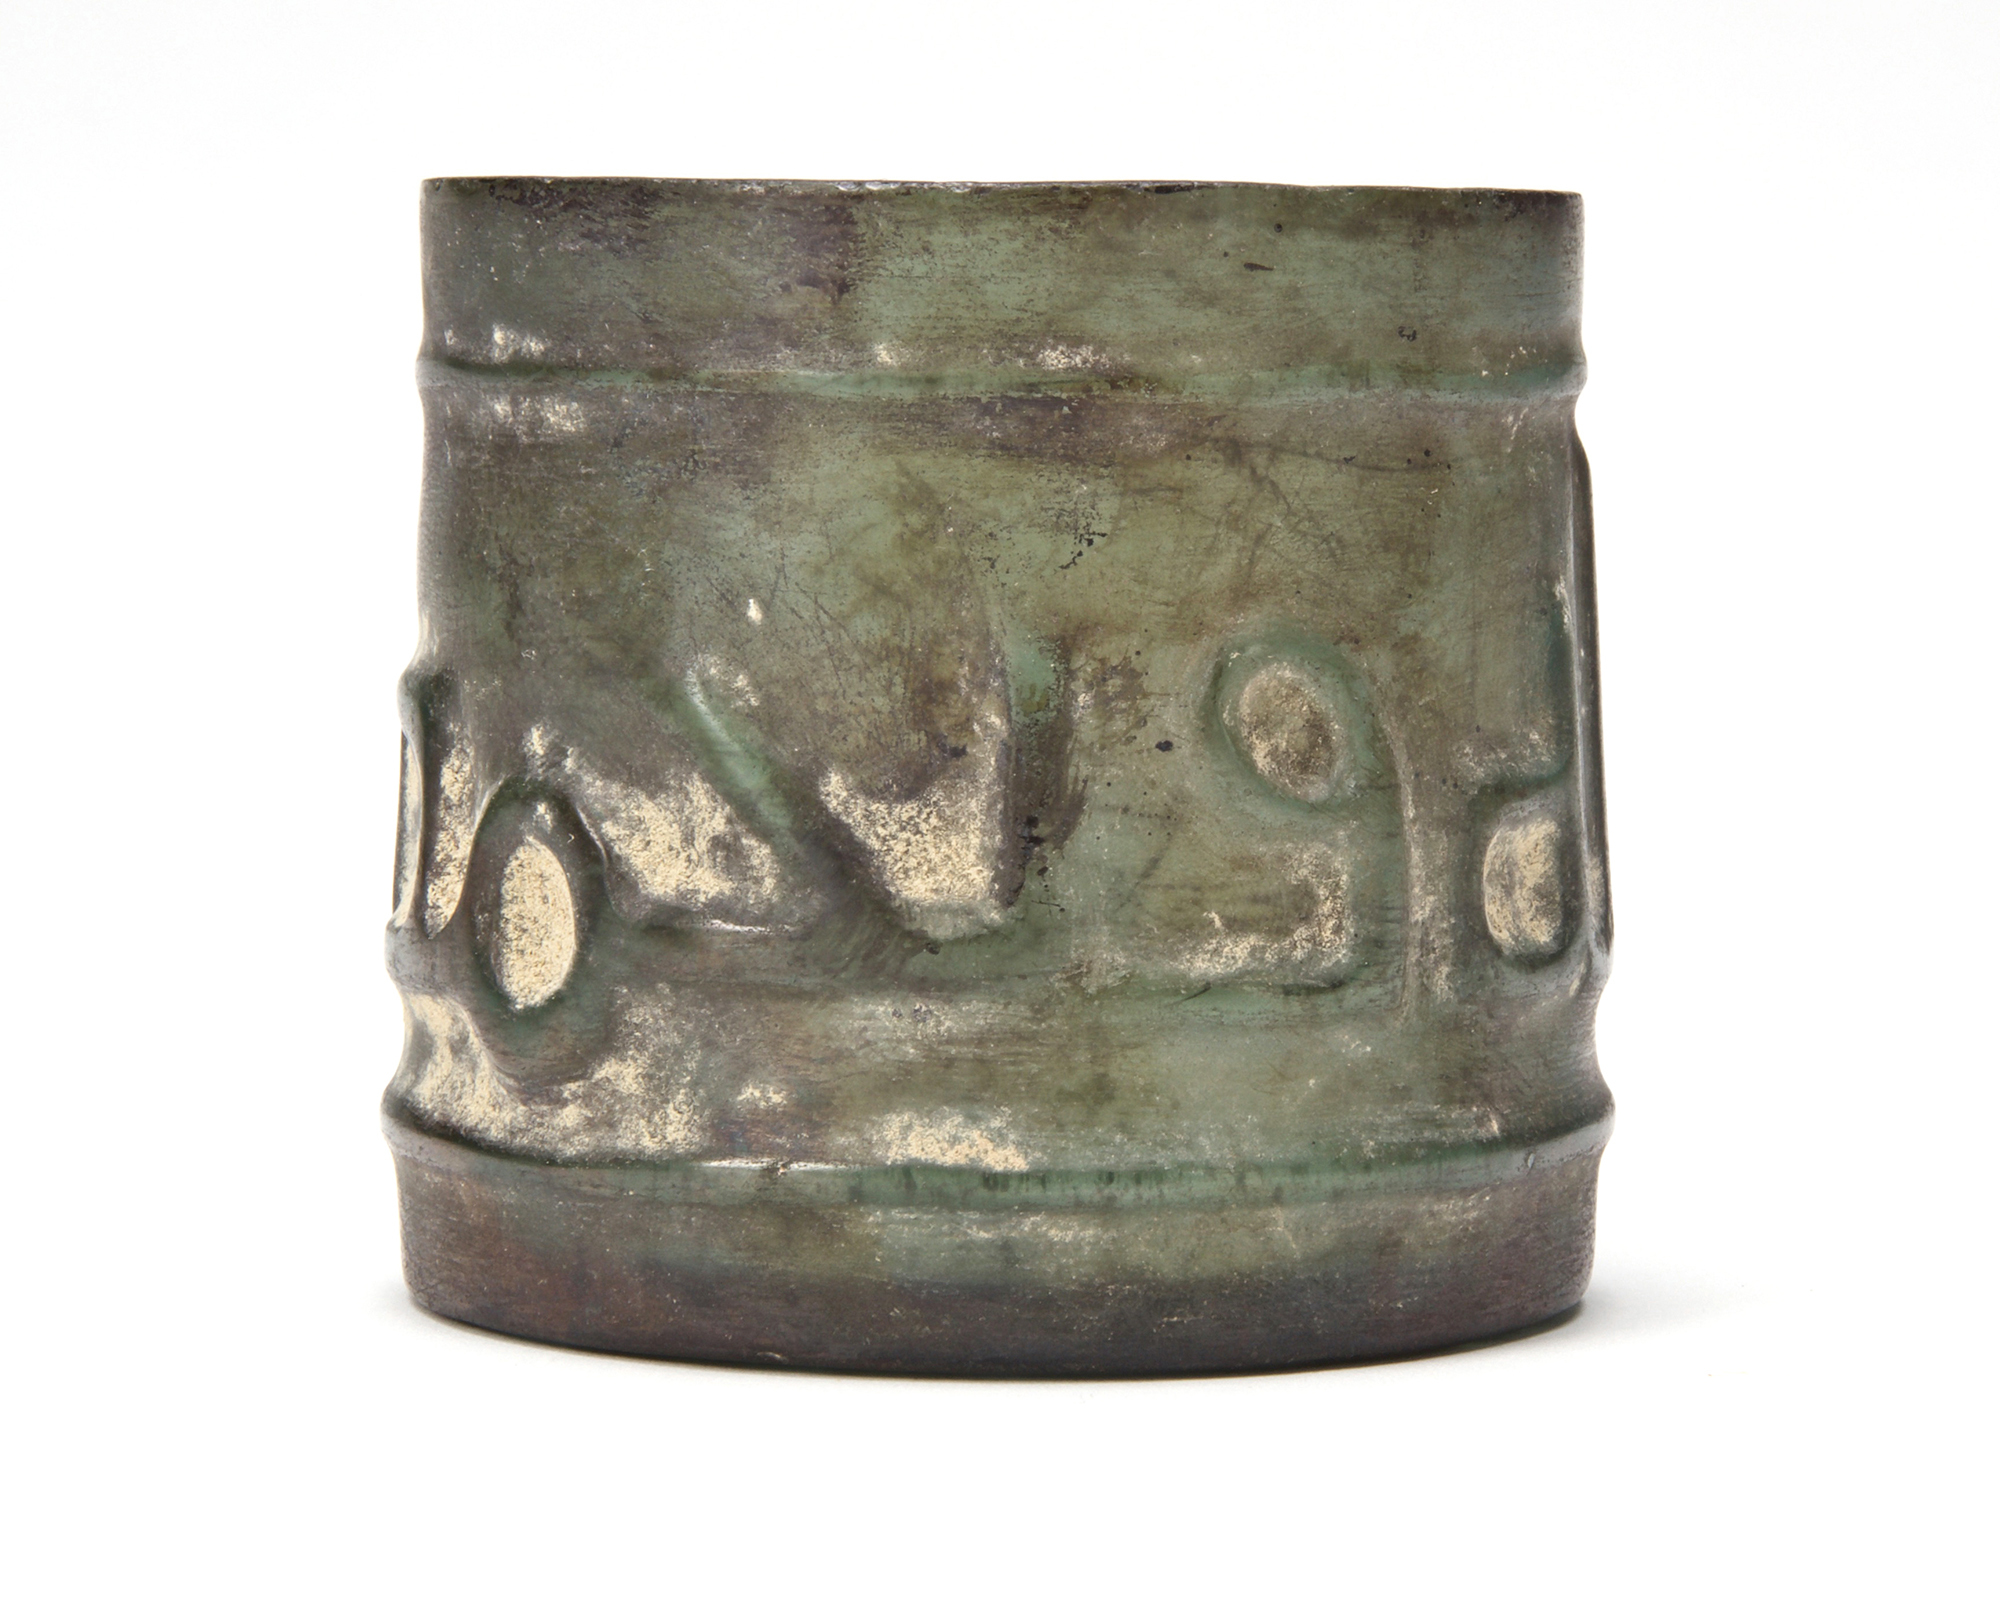 A GLASS BEAKER, SYRIA, 10TH-11TH CENTURY - Image 5 of 14